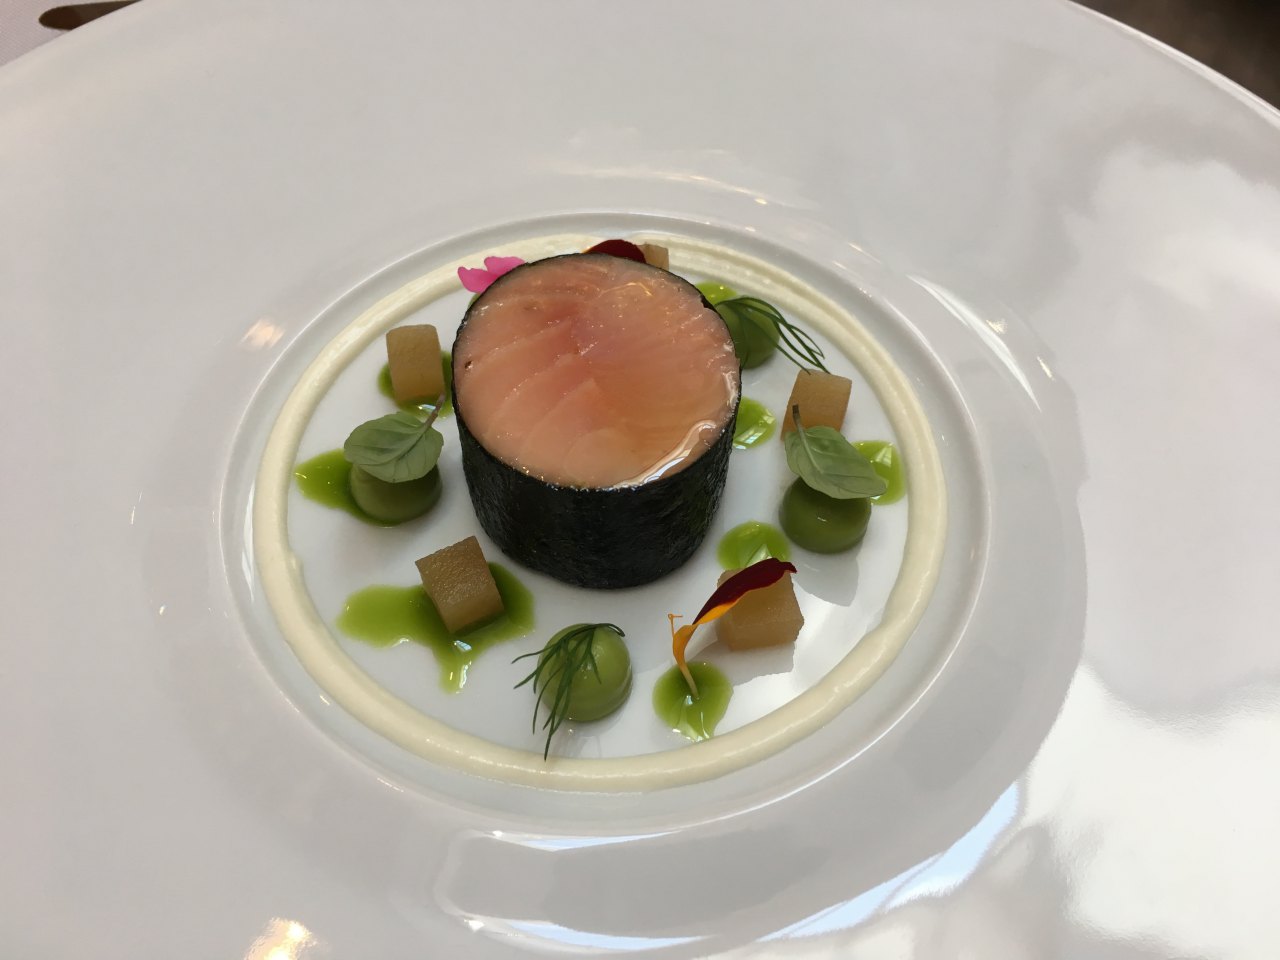 Patrick Guilbaud Dublin Review-Salmon and Nori Appetizer